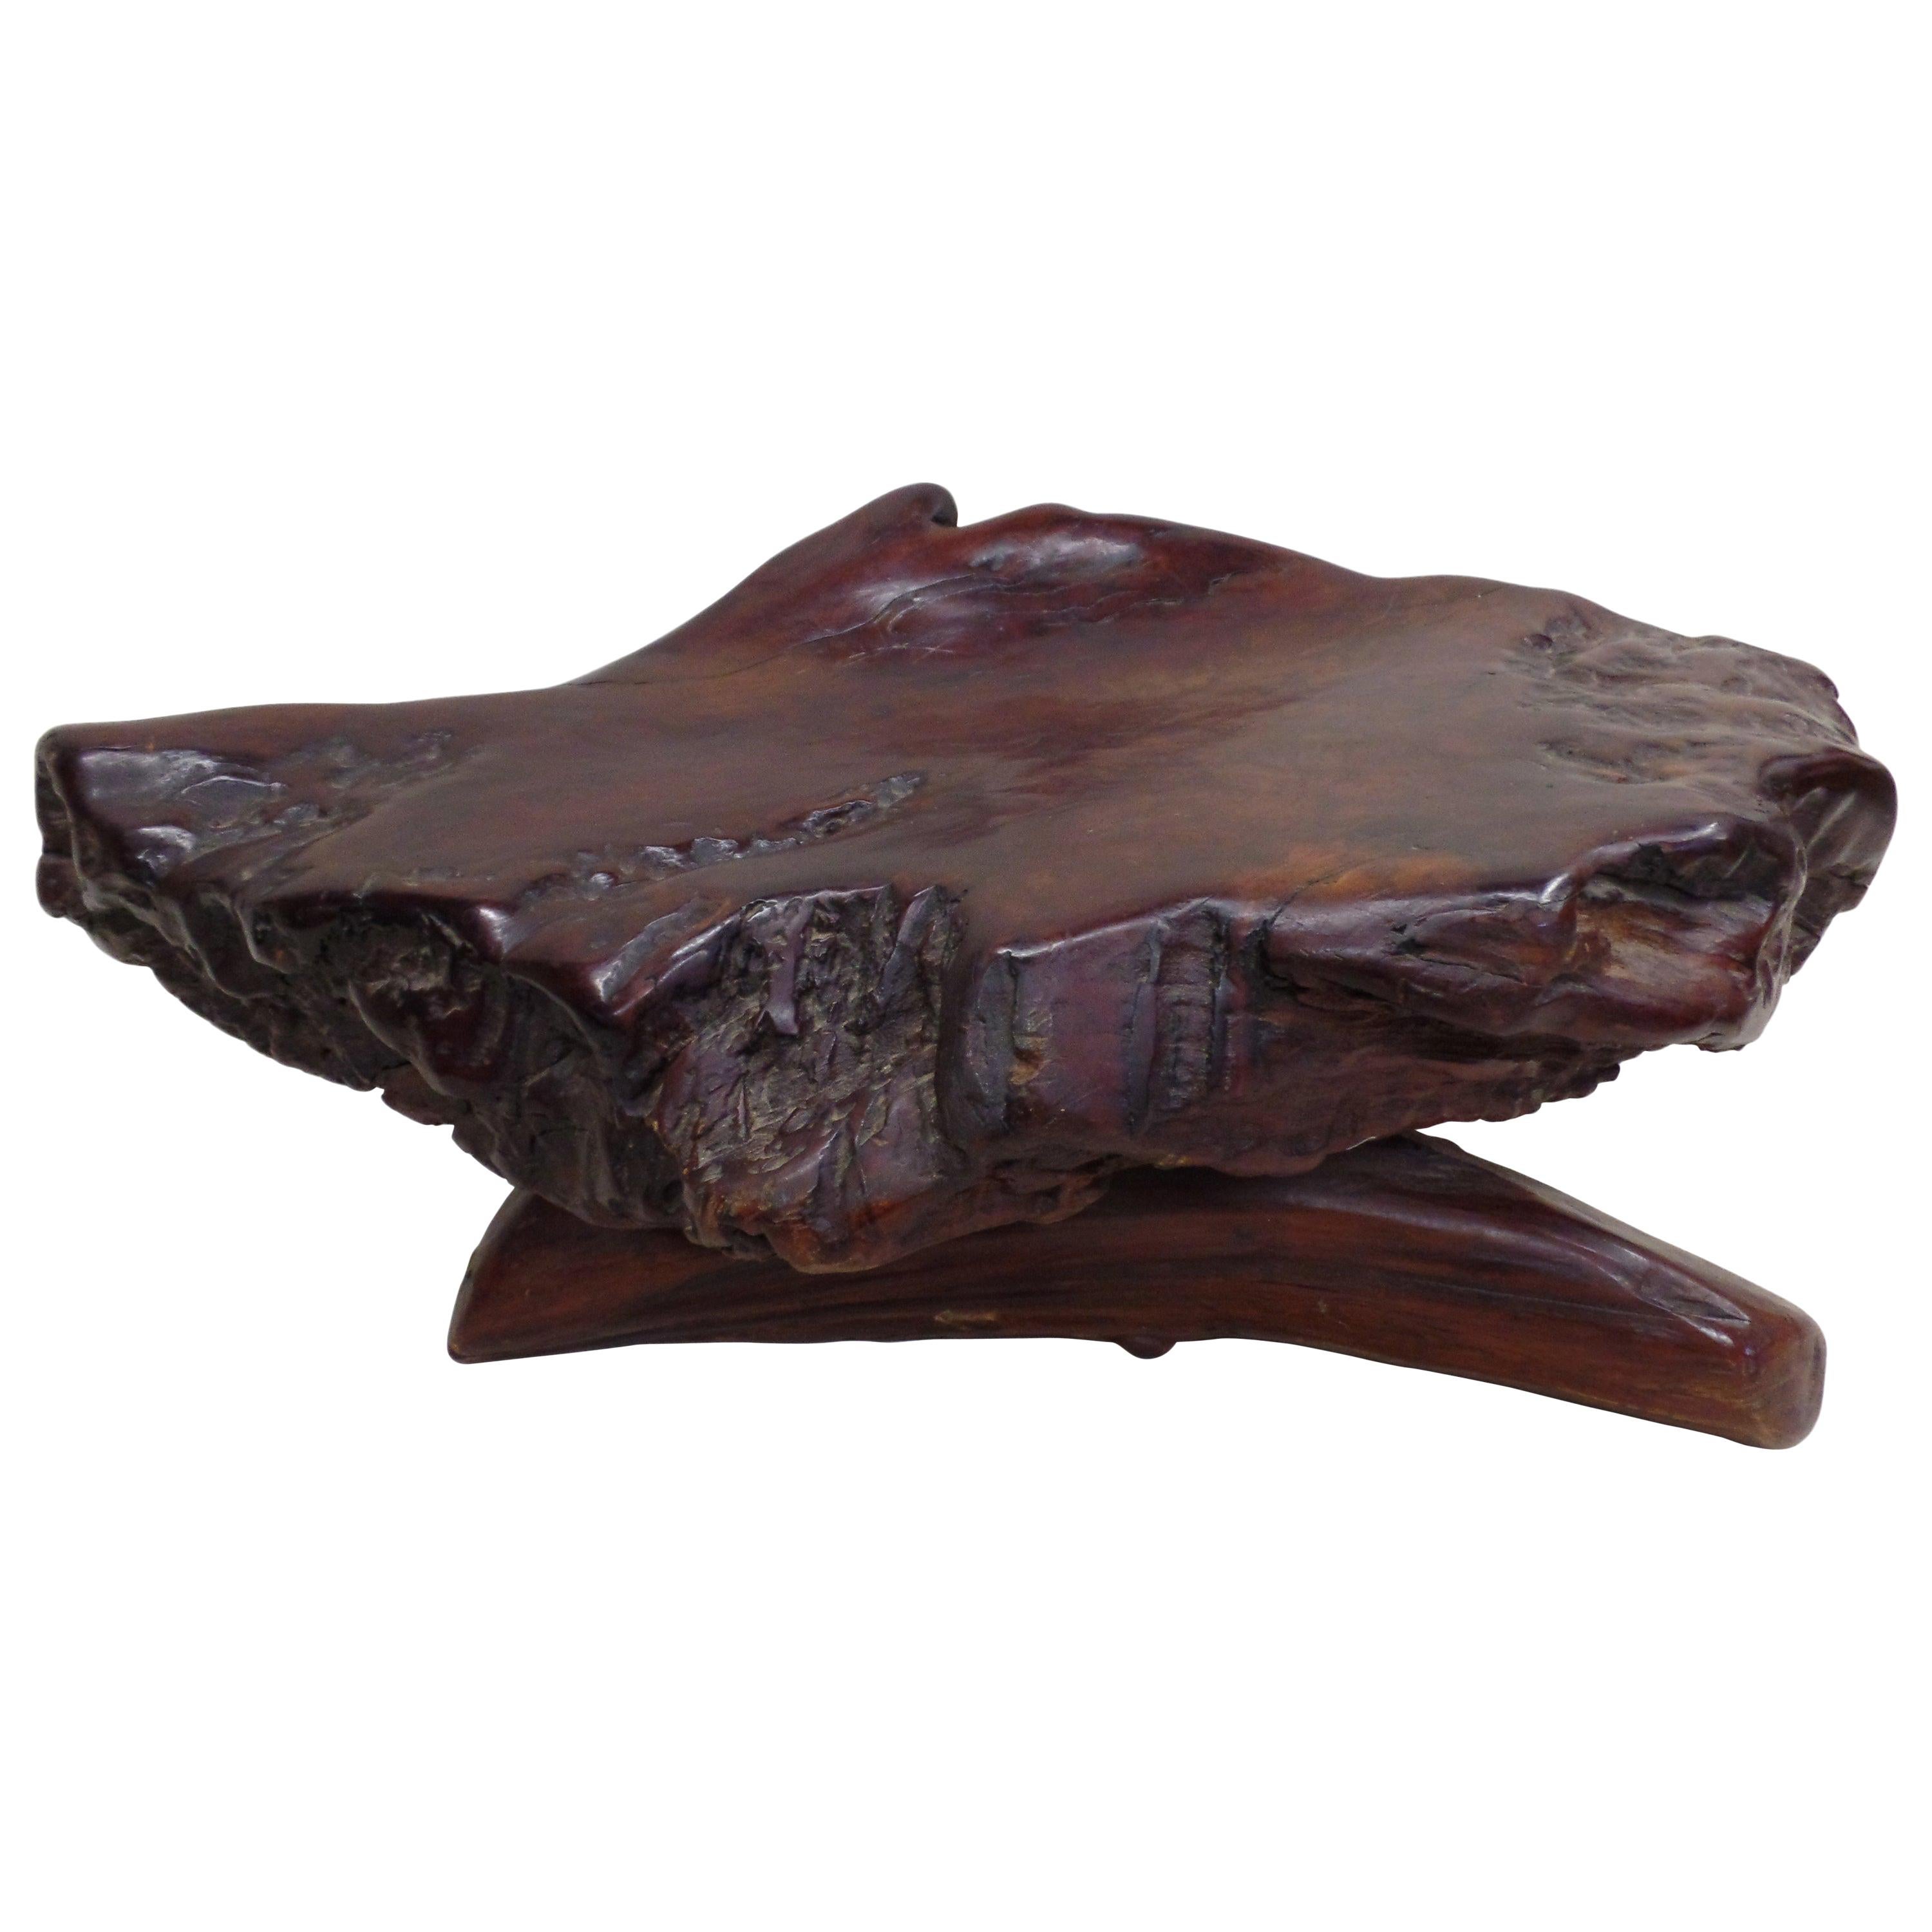 French Modern Craftsman Hand Carved Wood Alpine Bench in an Organic Form, 1930 For Sale